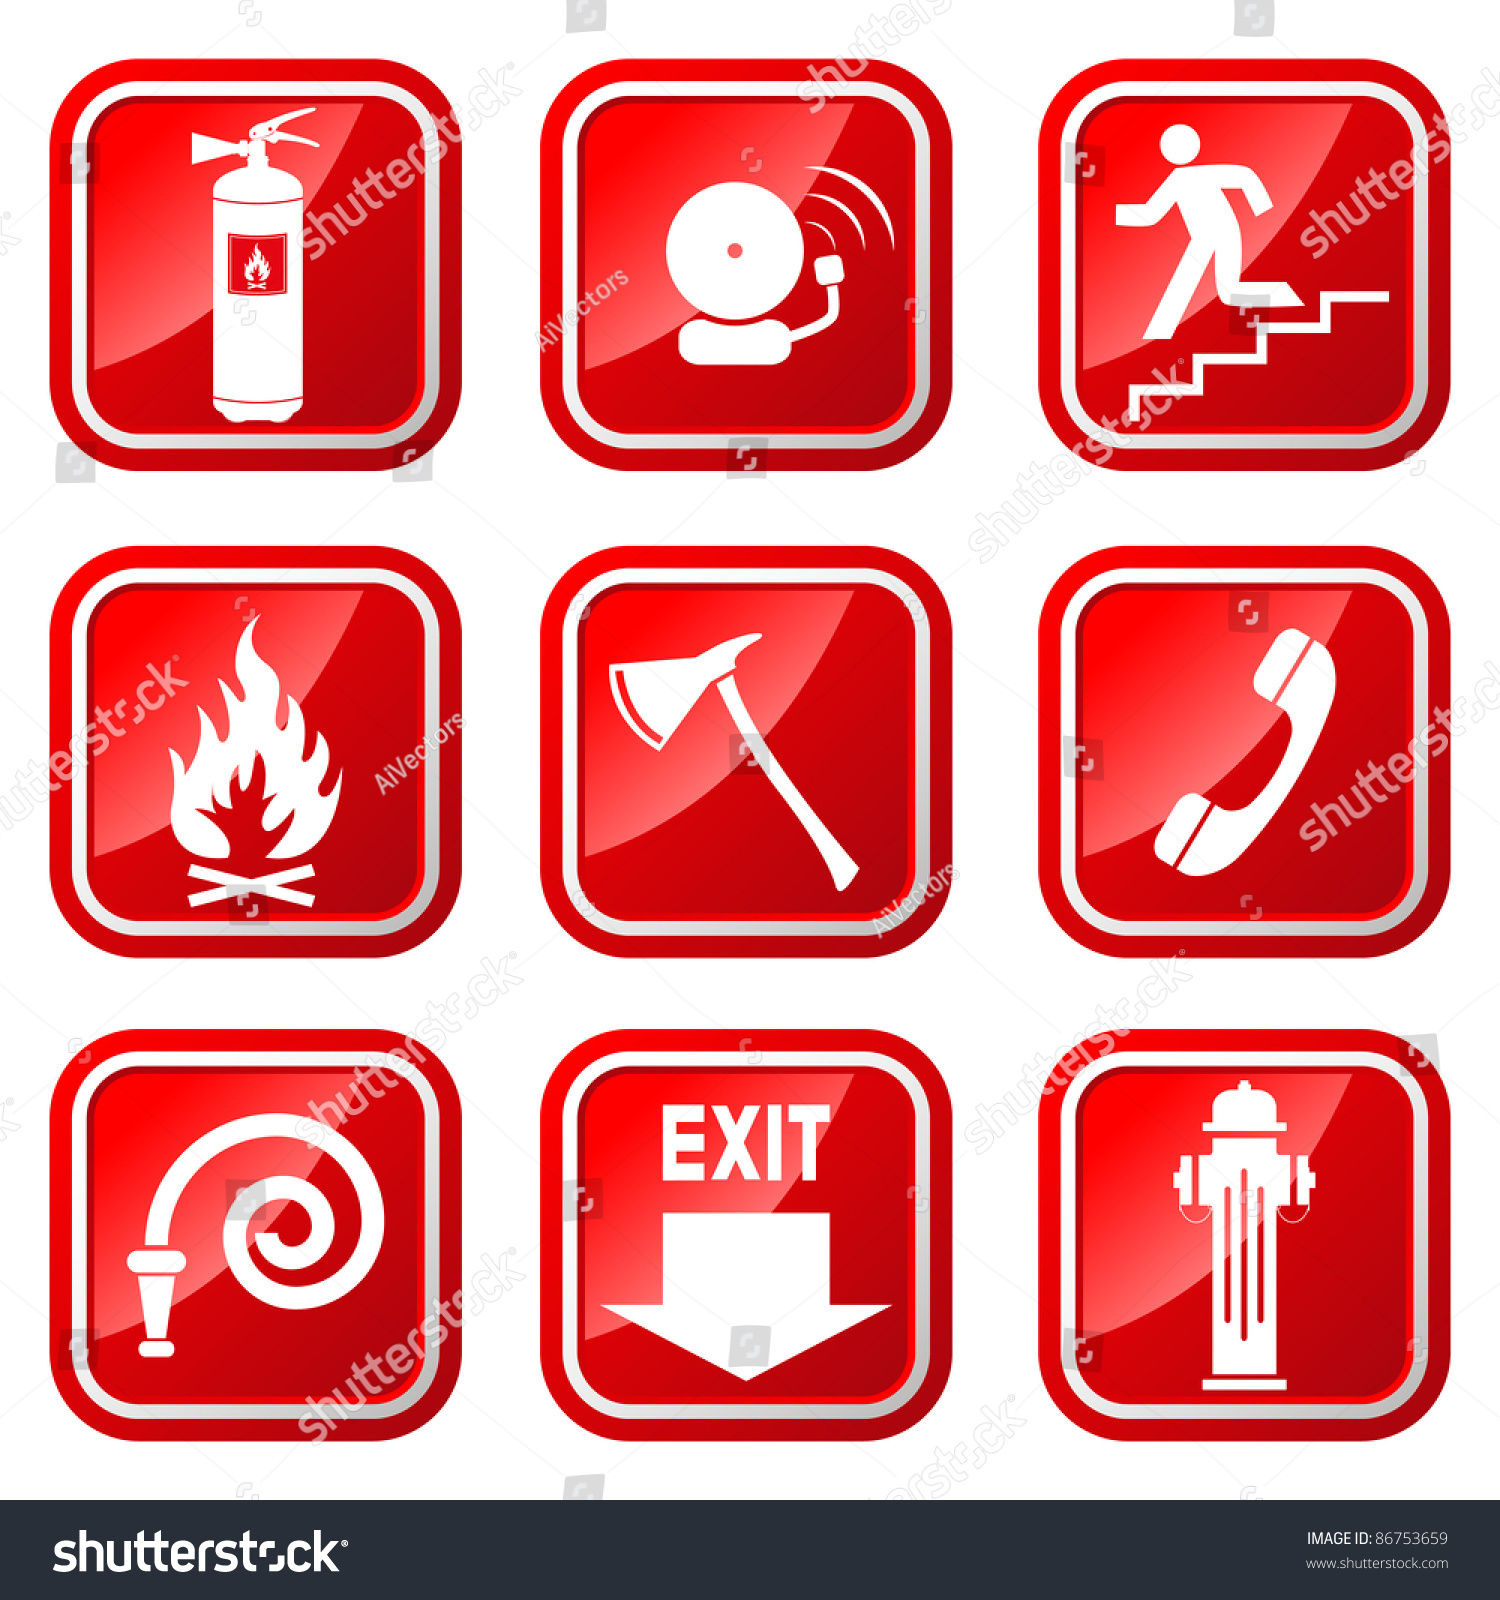 clipart fire signs - photo #49